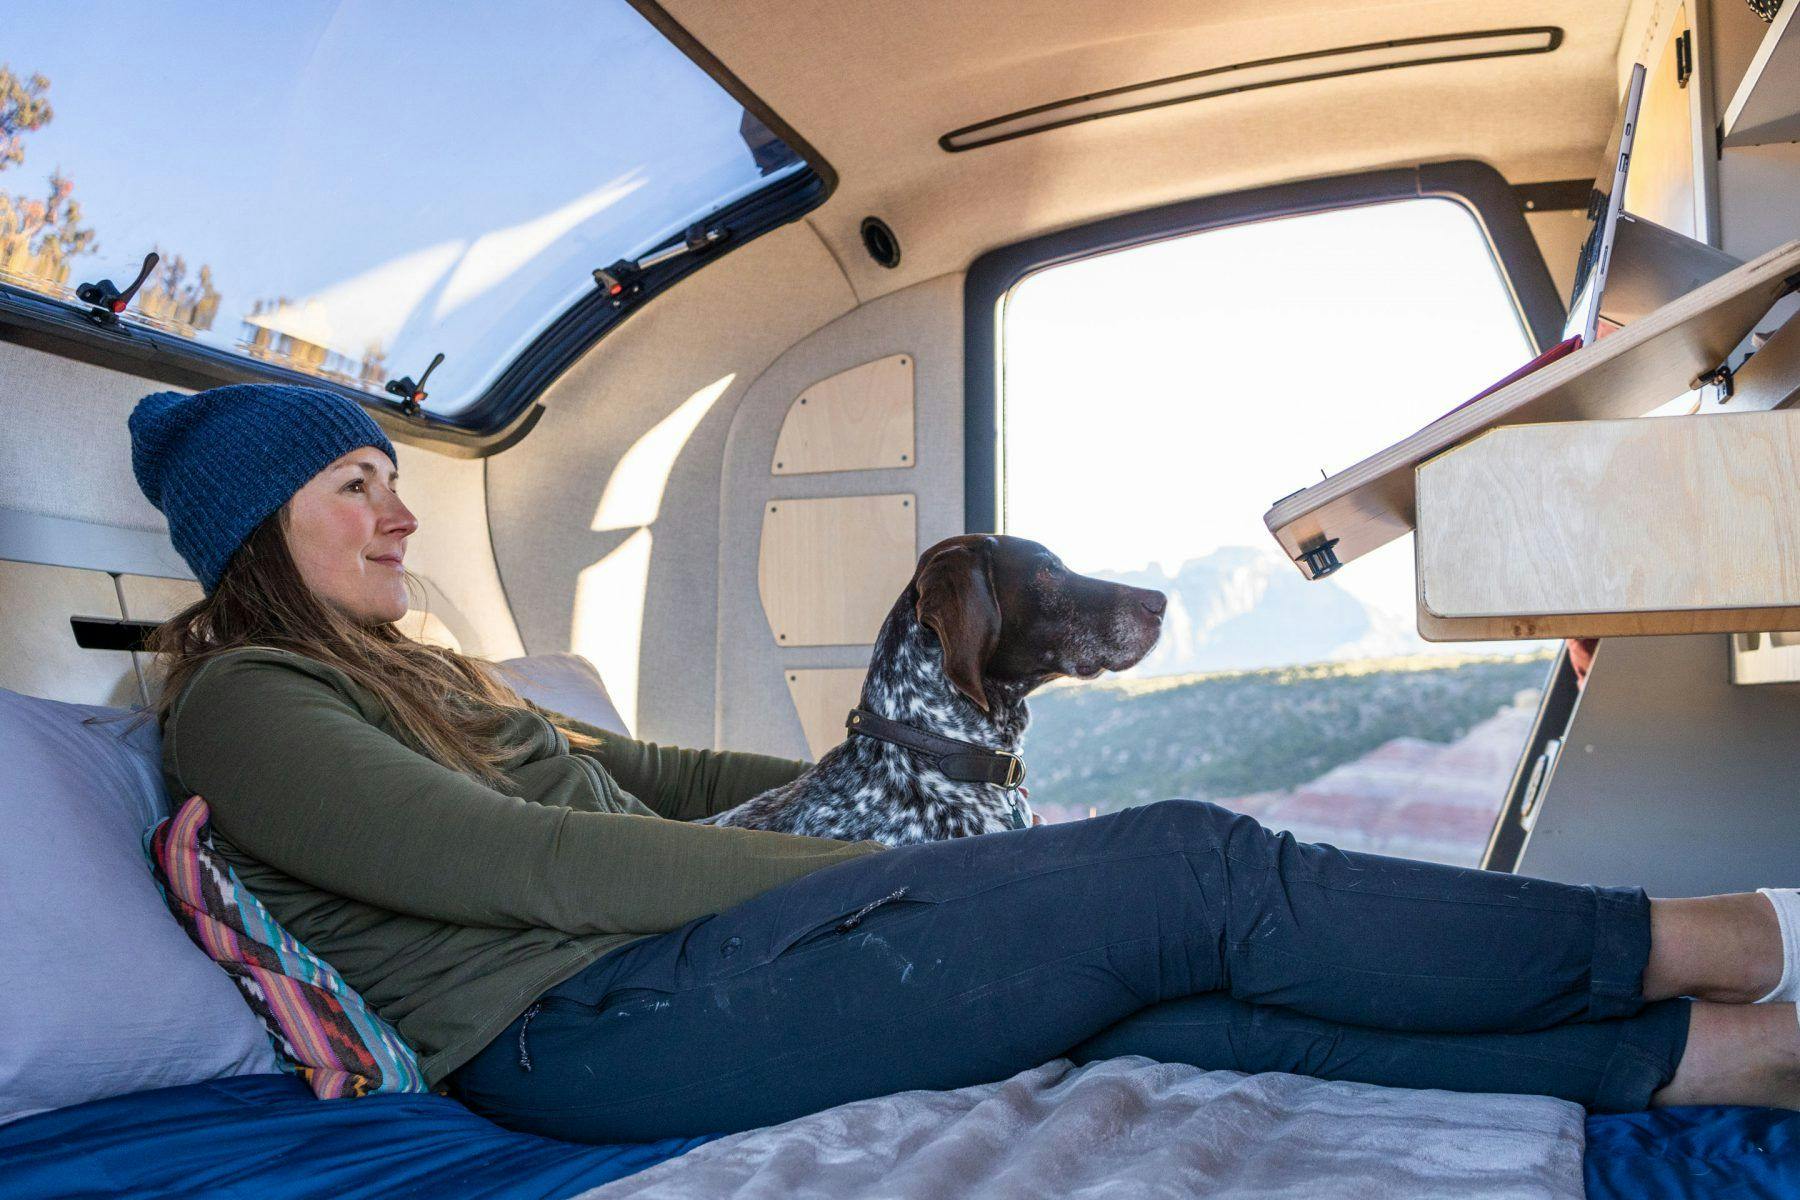 A woman and her dog cuddle in the cabin of a teardrop trailer. Comfortably relaxing and enjoying the scenery.